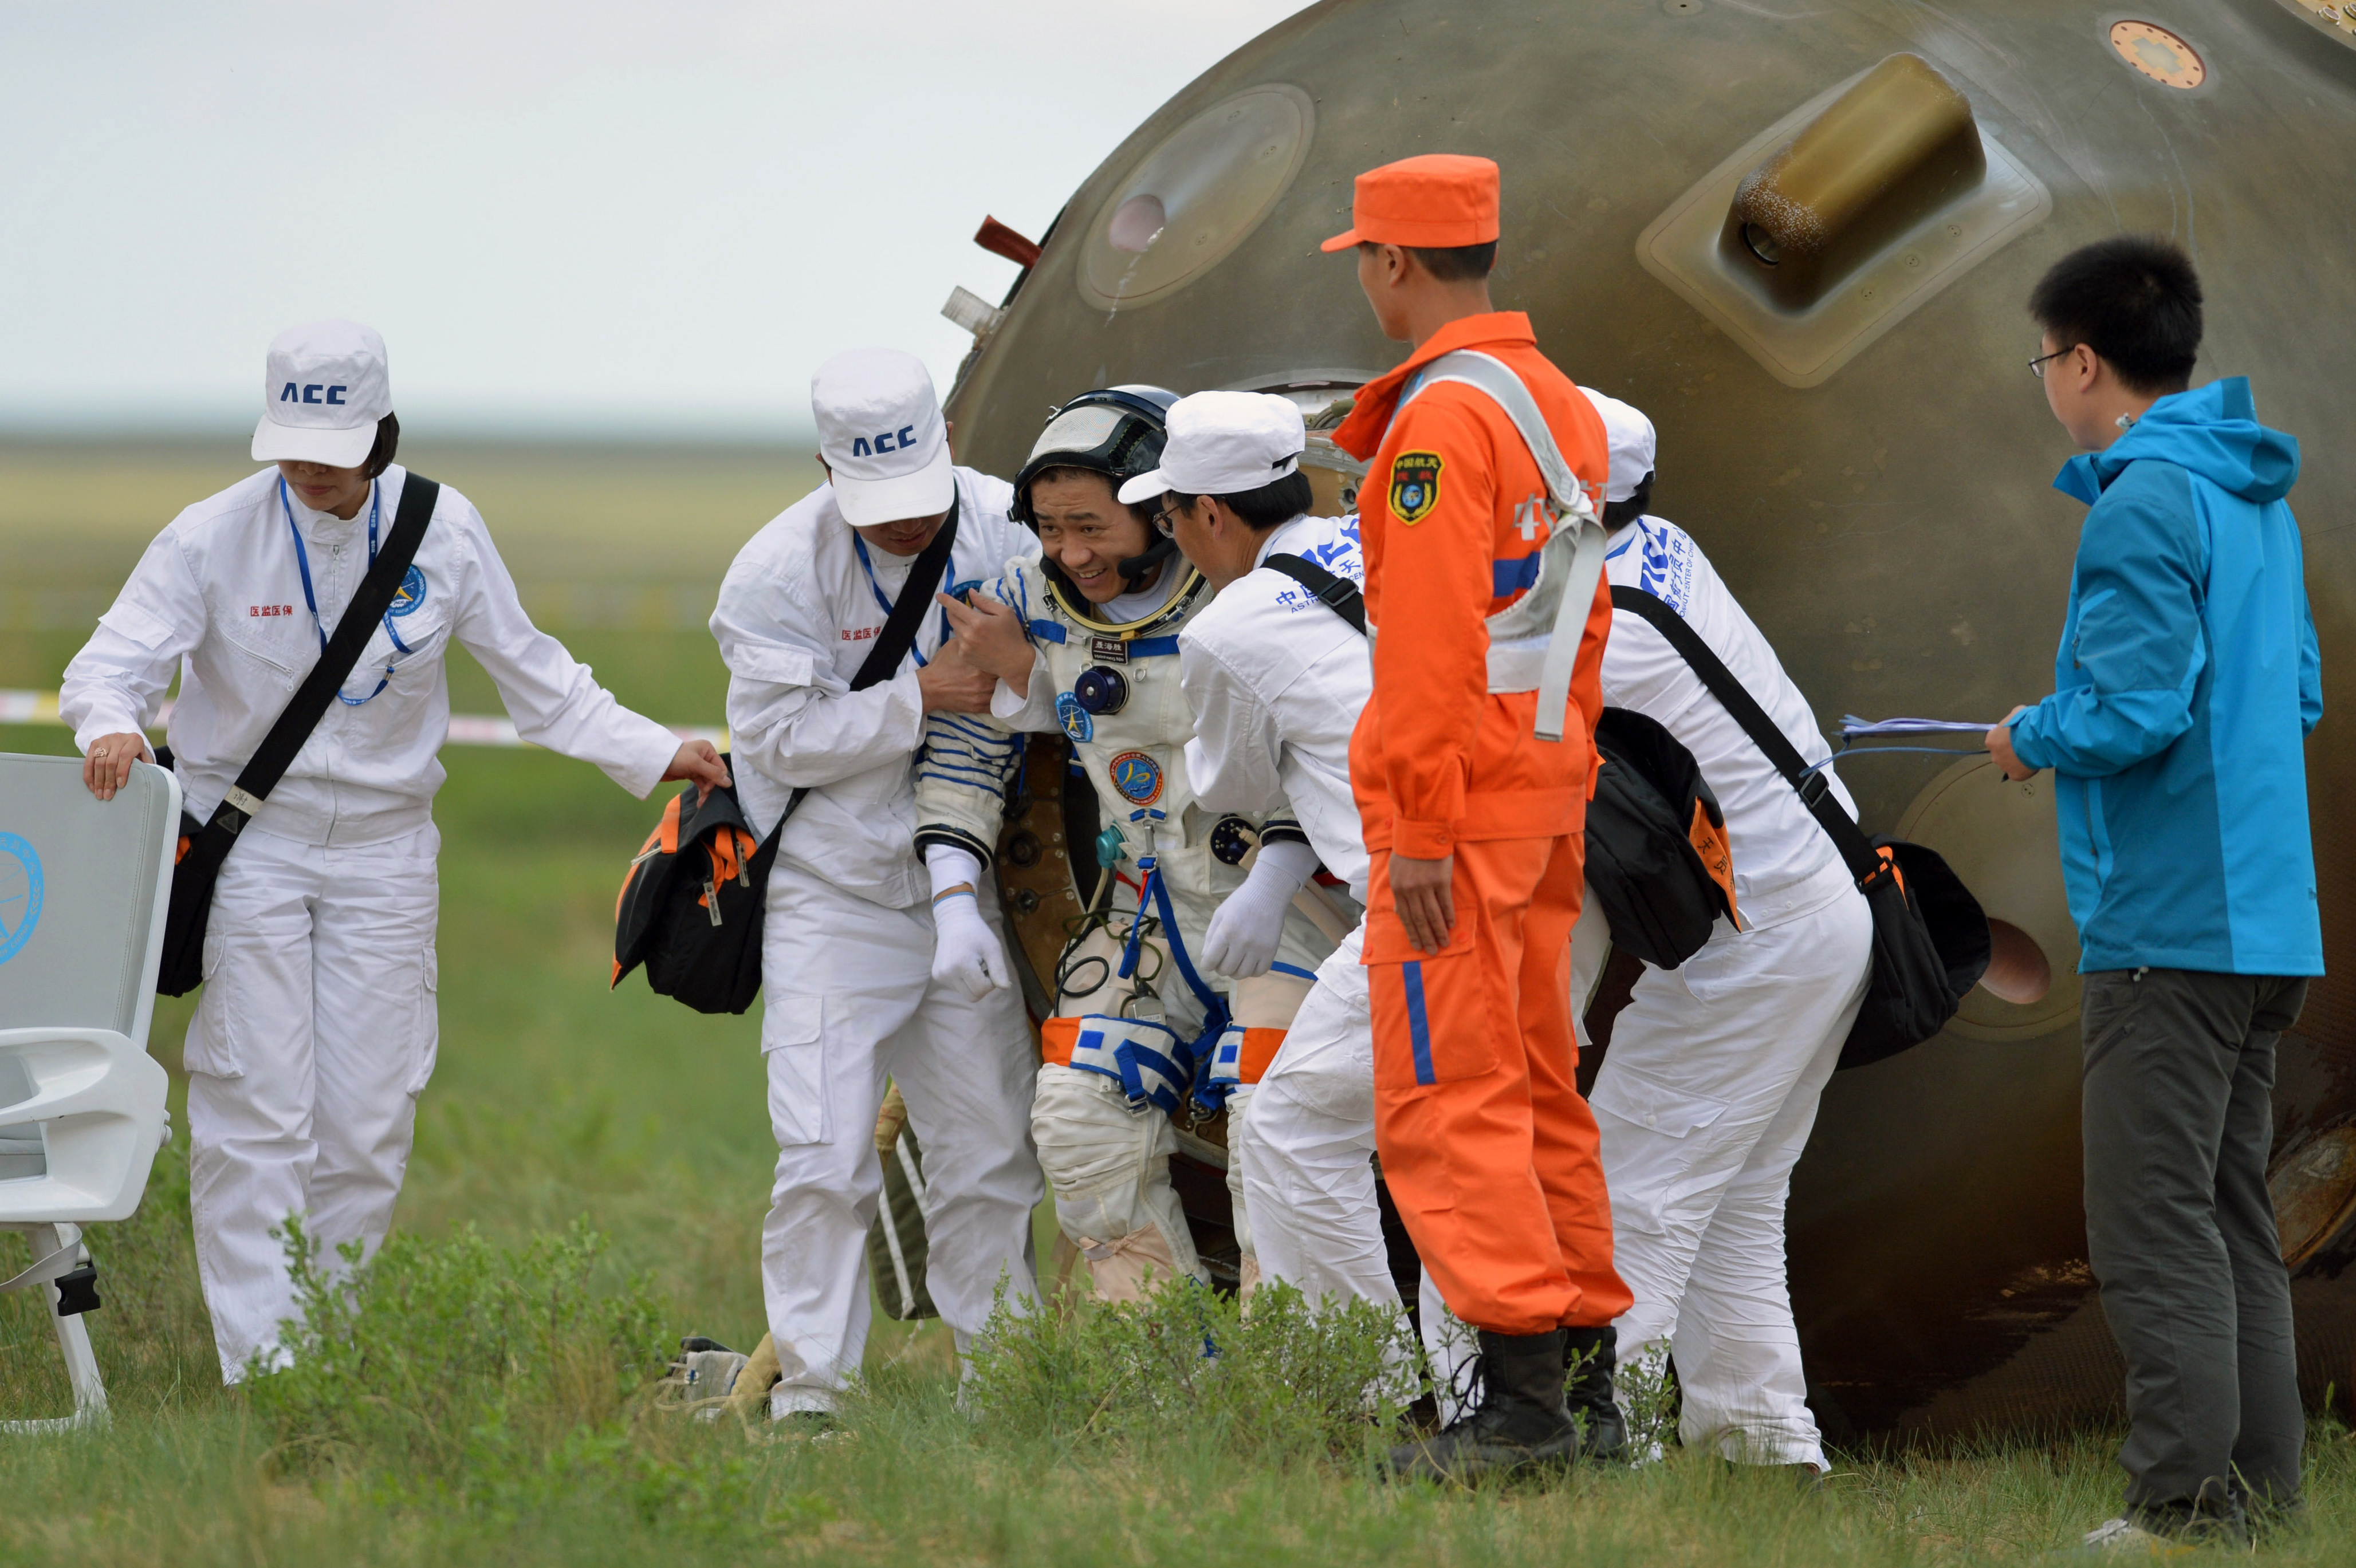 Welcome home: Nie Haisheng is helped out of his Shenzhou 10 spacecraft after a 15-day mission in 2013.